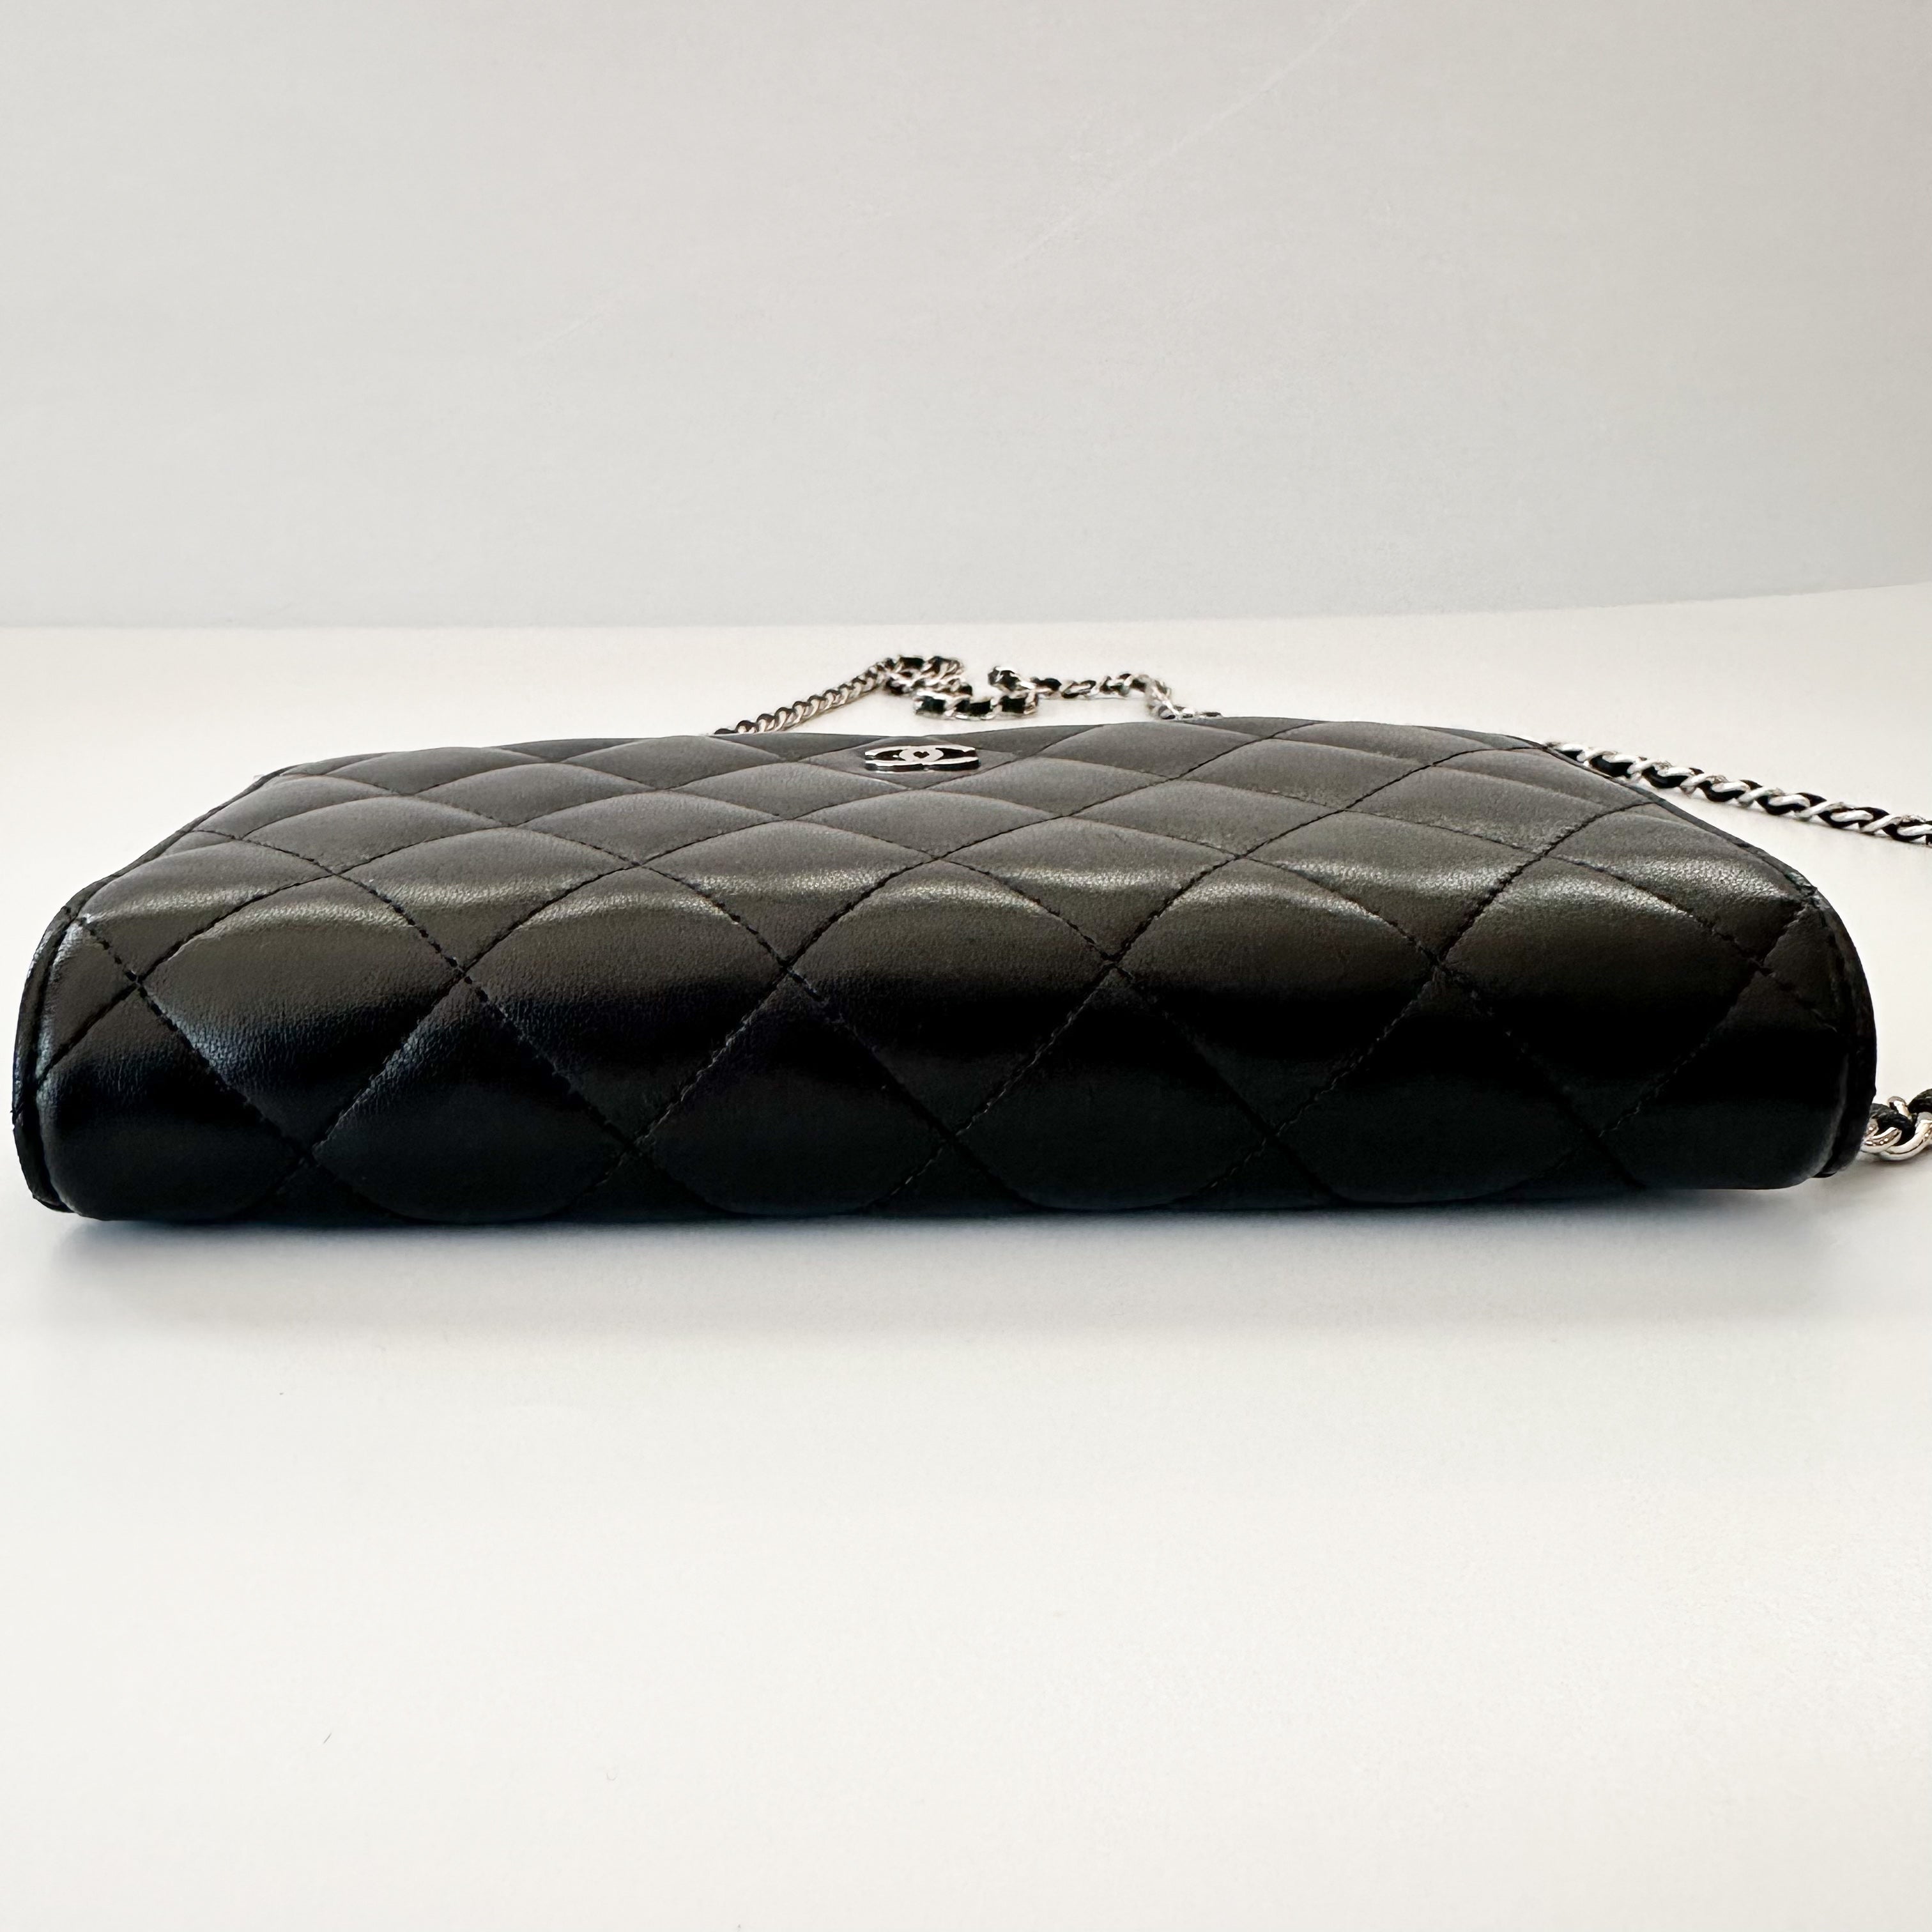 Chanel Lambskin Quilted Wallet on Chain WOC Black SHW